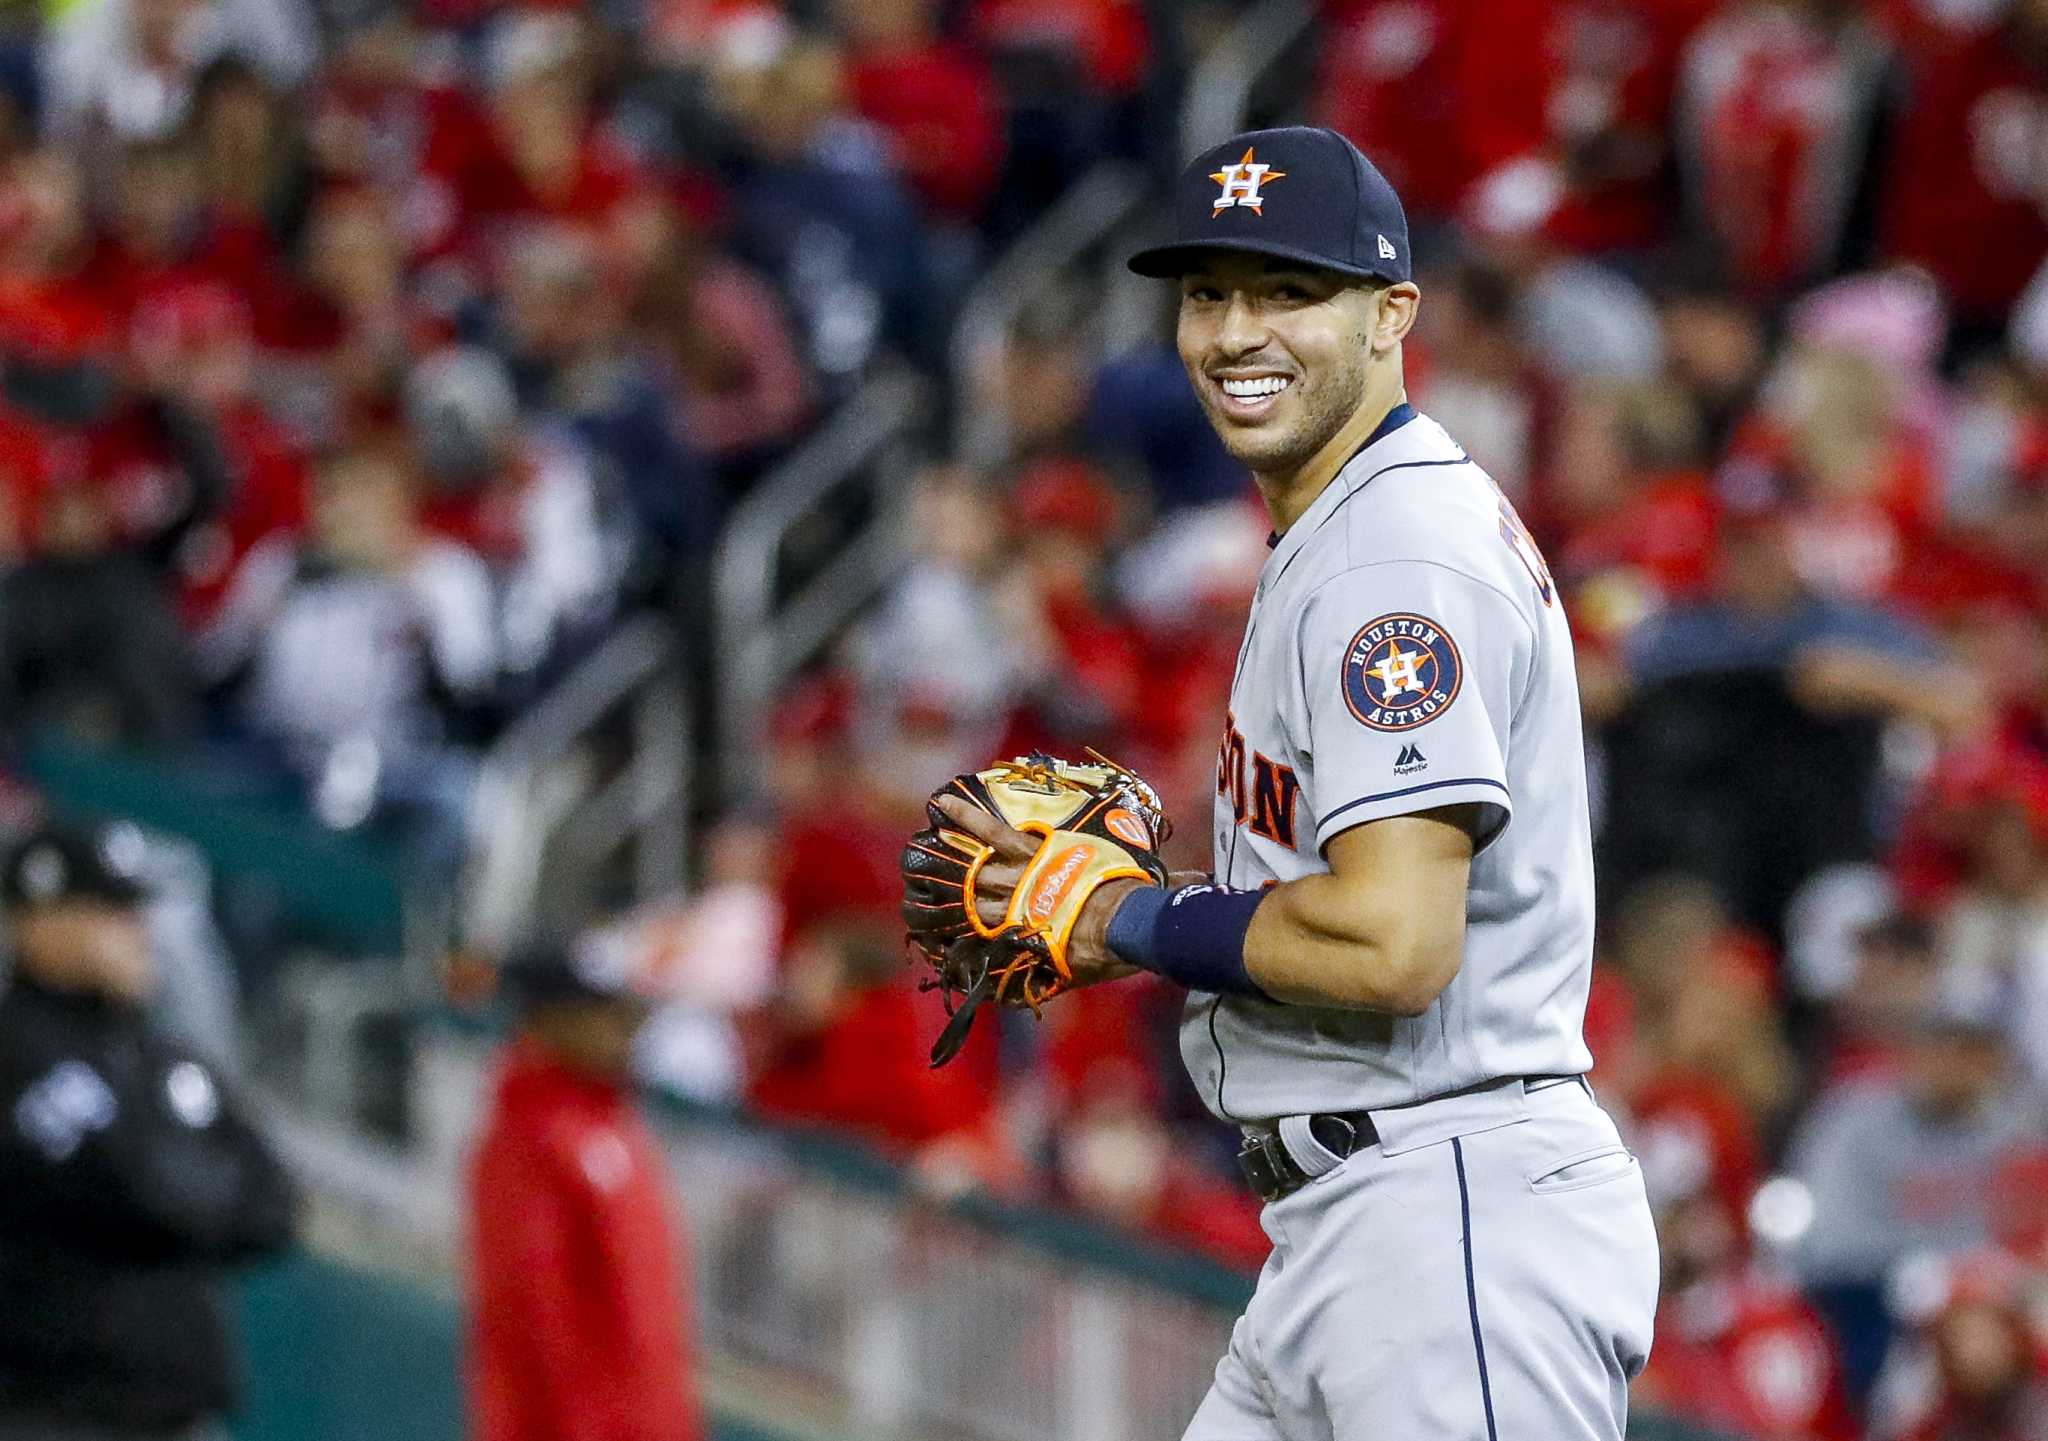 Carlos Correa staying with Astros? Encouraging reports point that direction.